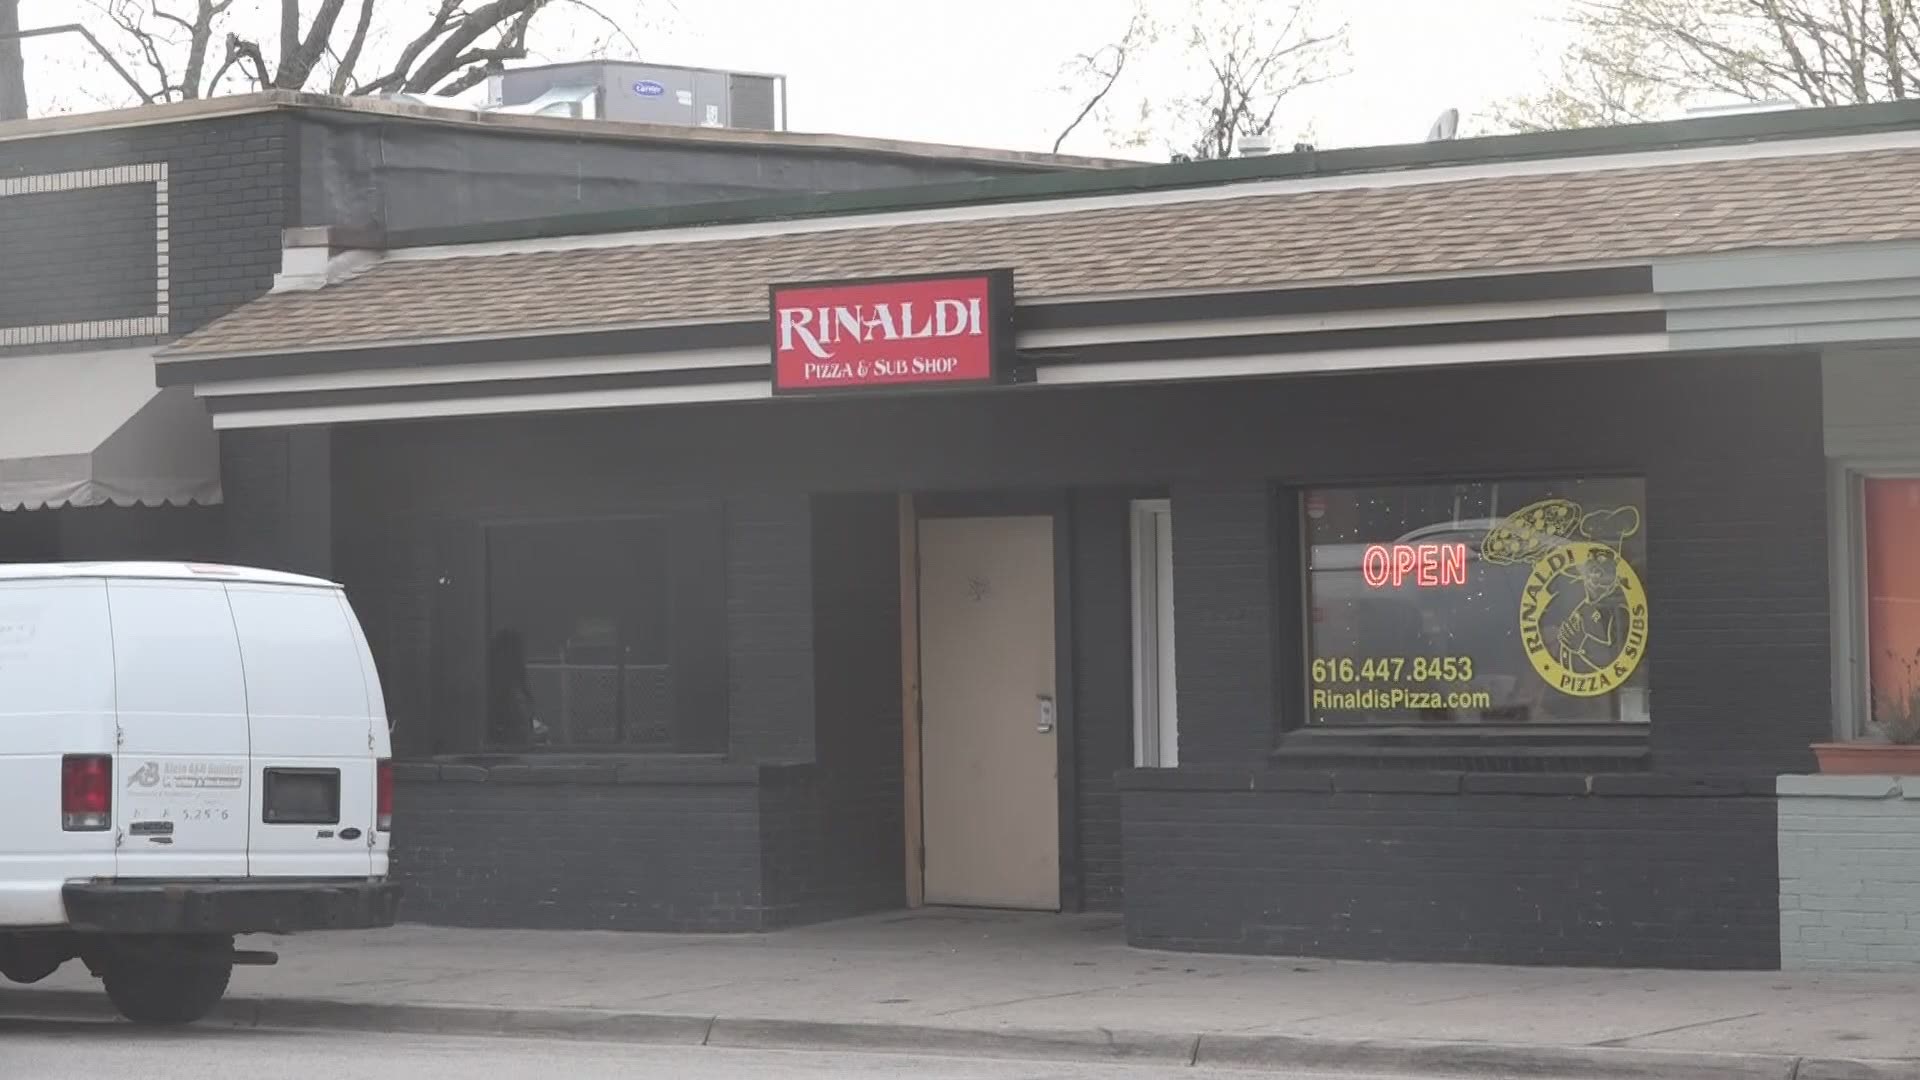 The lack of applications shut down the Rinaldi's Pizza on Fulton Street for good.